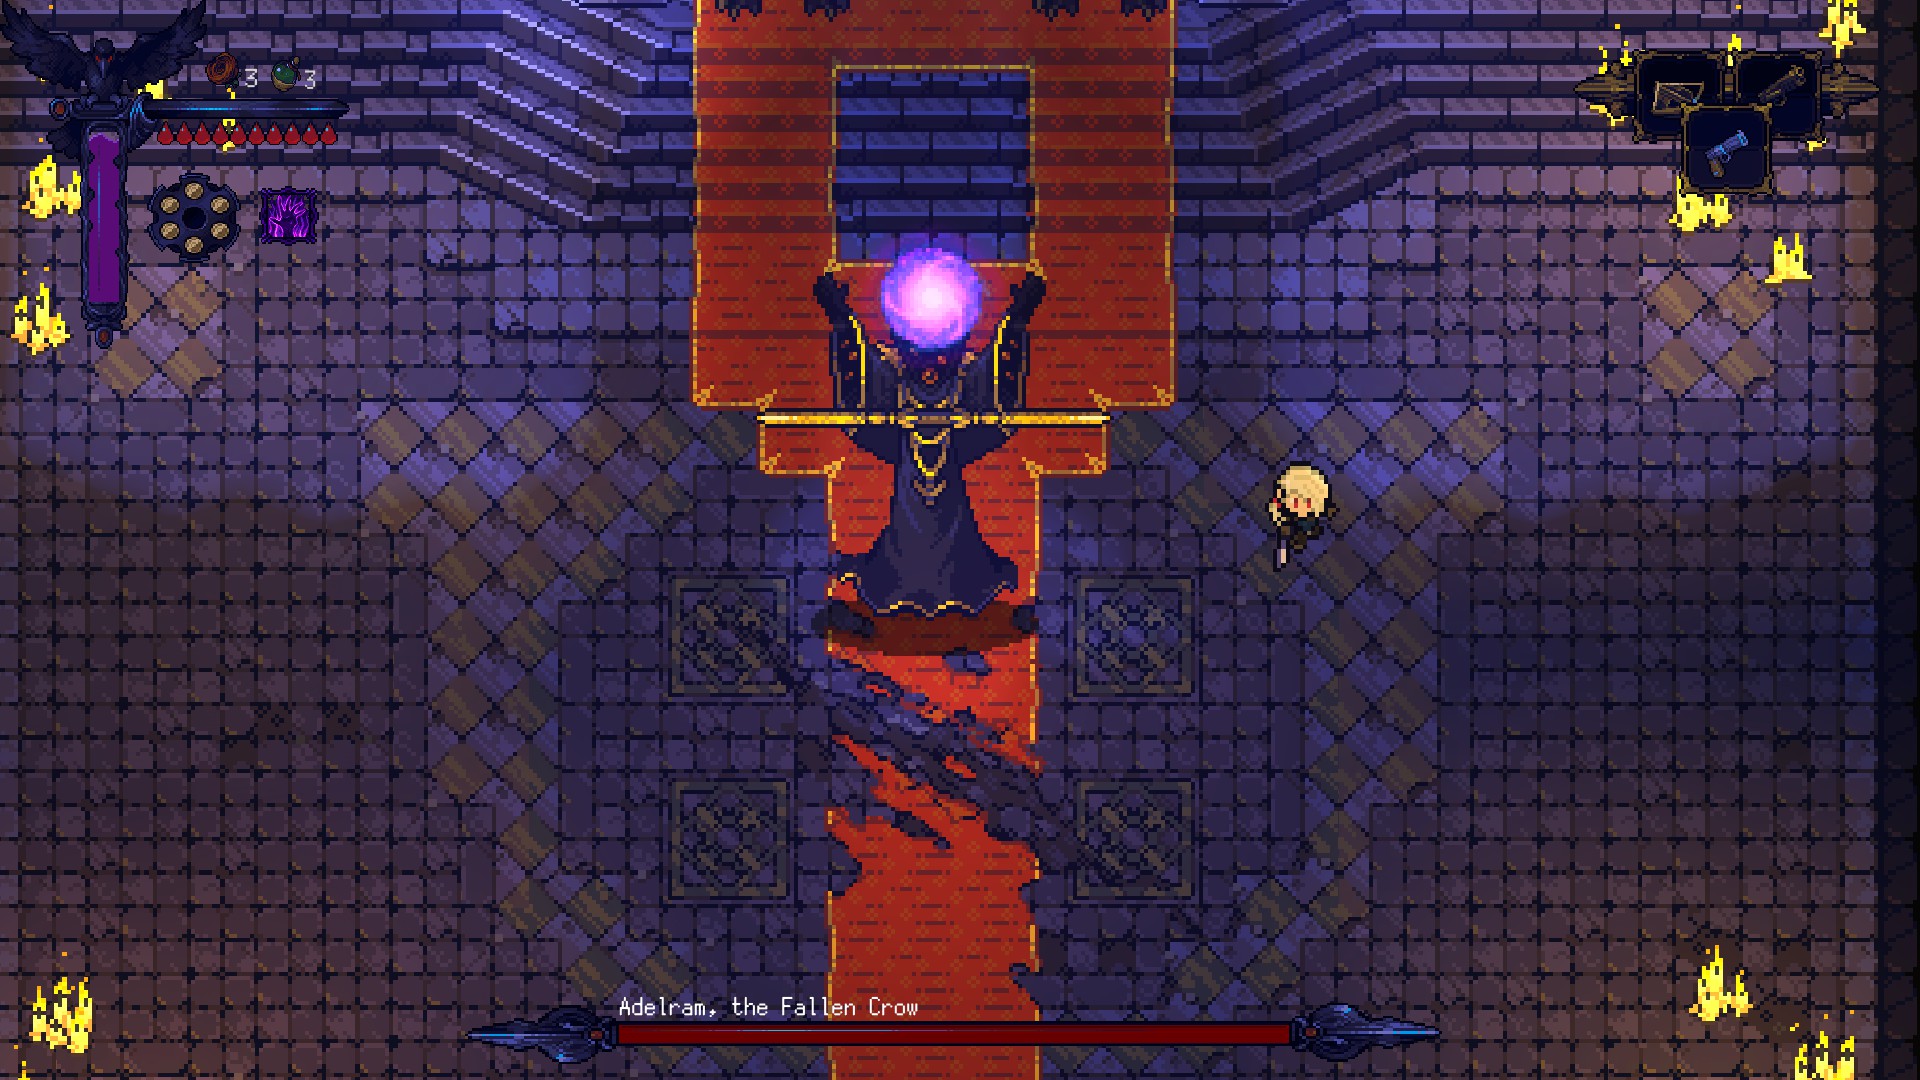 Vesper is currently fighting the boss known as Aledram. Boss is charging up a purple orb to hurl at the player. Health bar is displayed below.